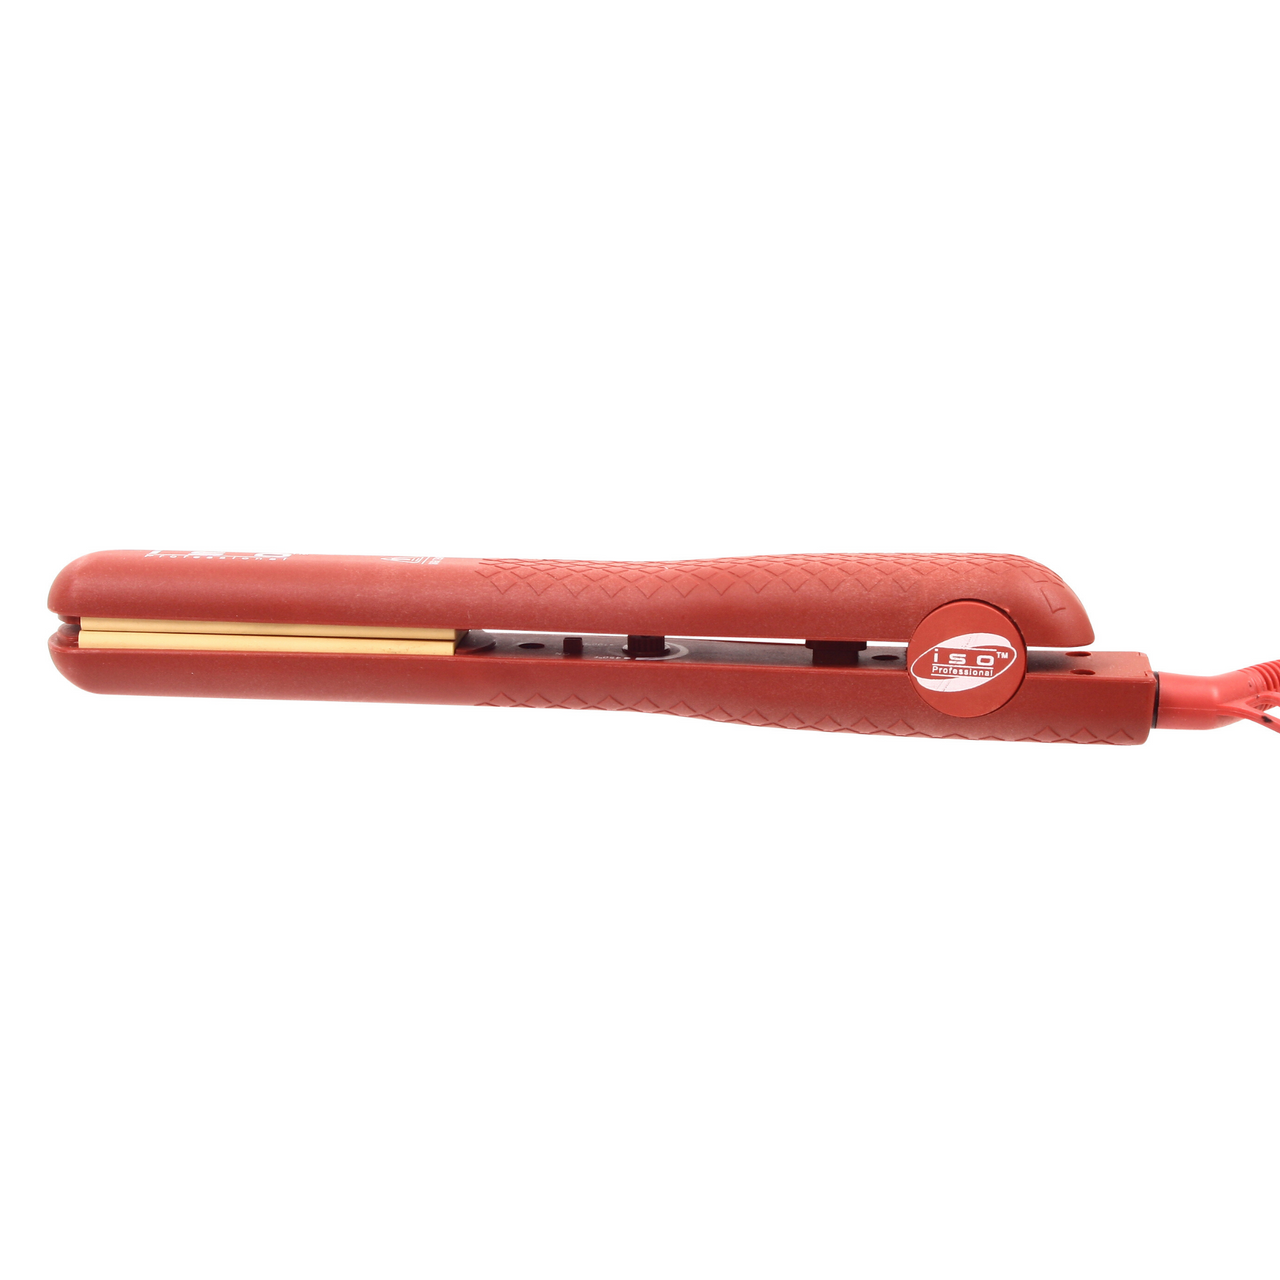 Red Vintage 1.25" Yellow Floating Ceramic Flat Iron Straightener with Adjustable Temperature